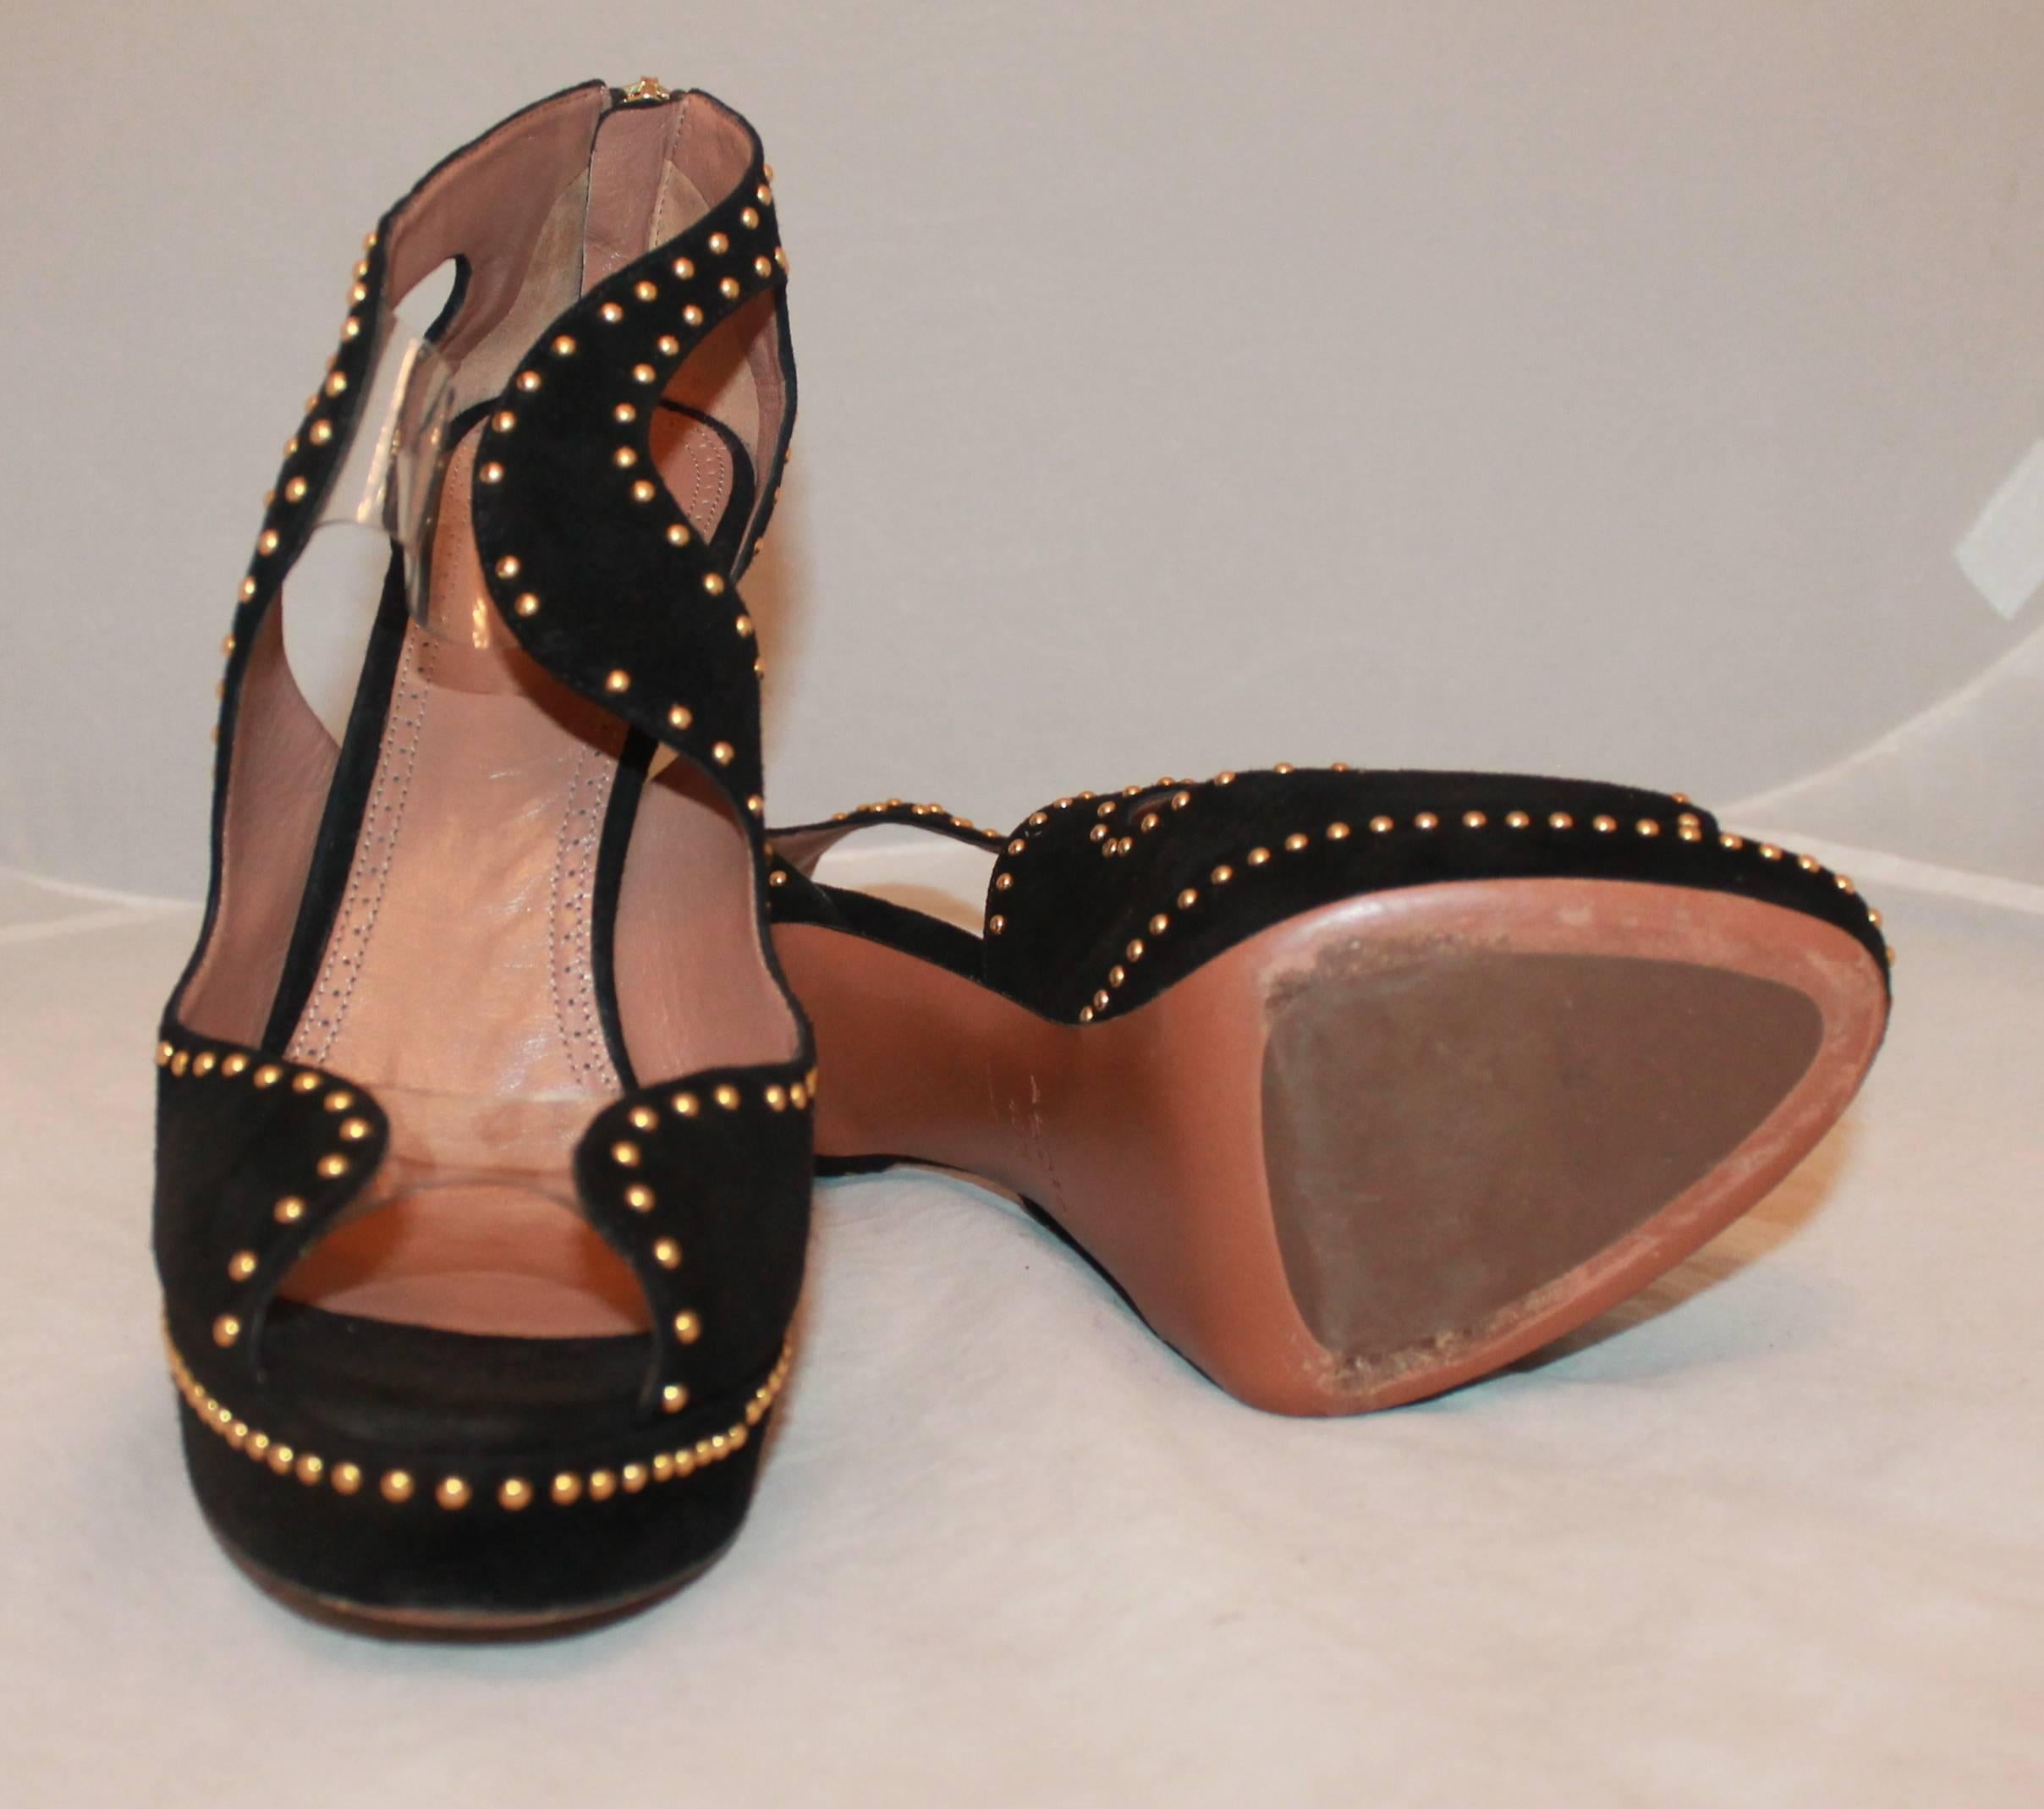 Women's or Men's Alaia Black Suede Cutout Platform Heels with Small Gold Studs - 40.5